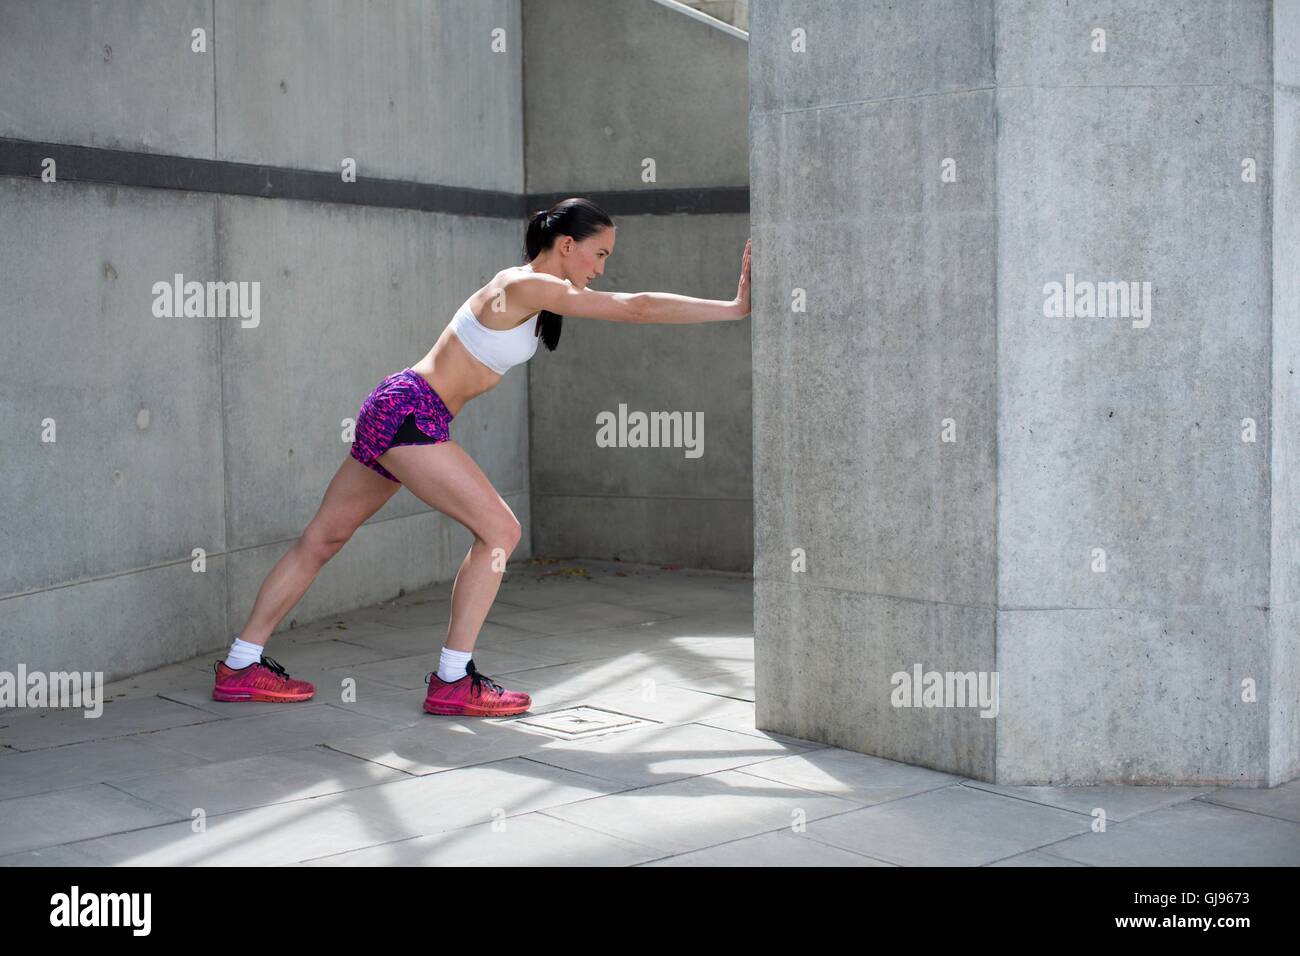 MODEL RELEASED. Young woman stretching against wall Stock Photo - Alamy